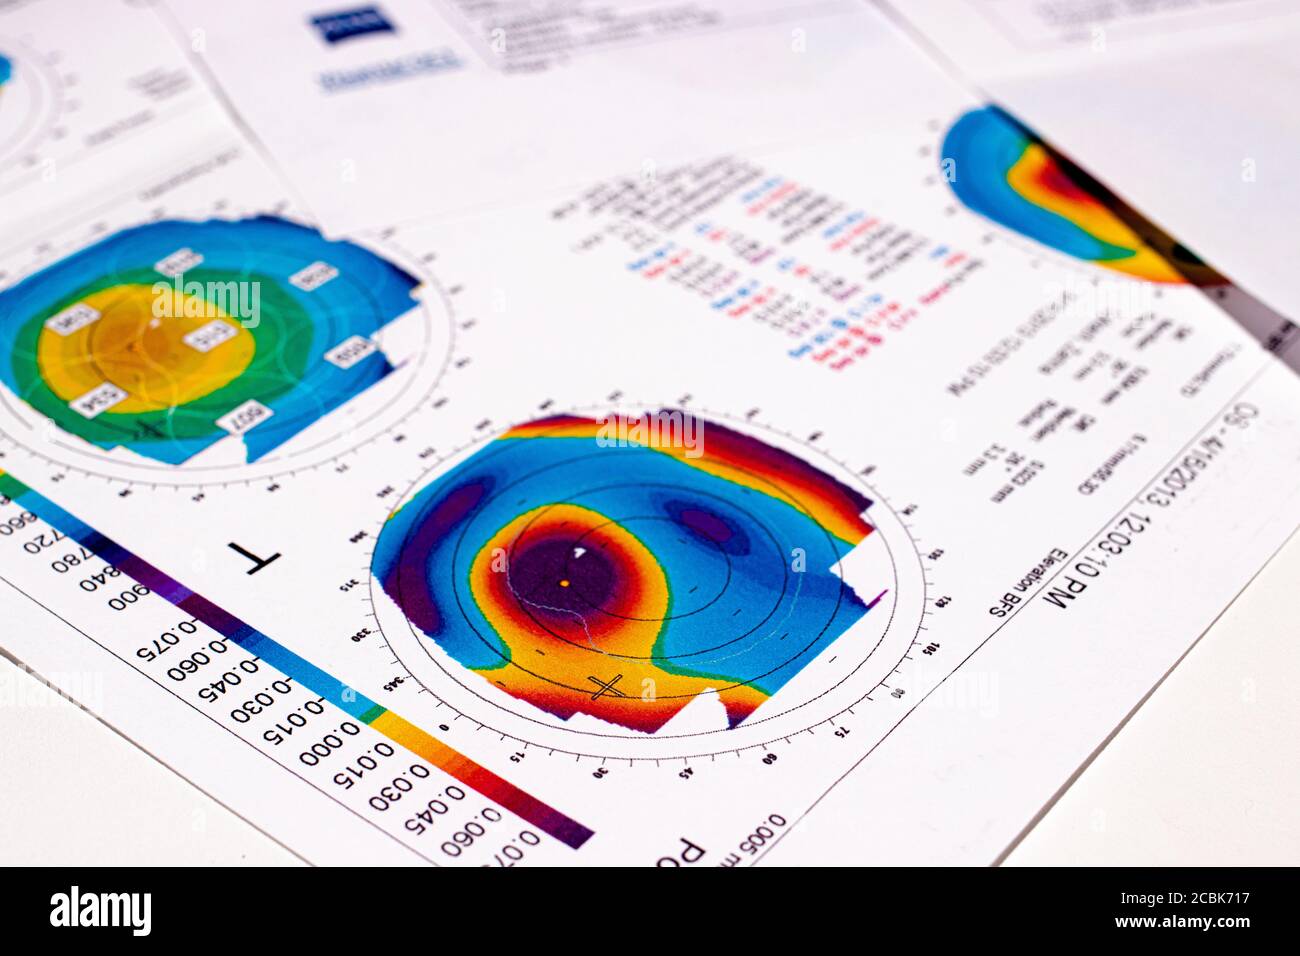 25.07.2020, Zarorizhzhya. Topography of the cornea of the eye, layout. Keratoconus of the right eye is 3rd degree and the left eye is 2 degrees. Stock Photo